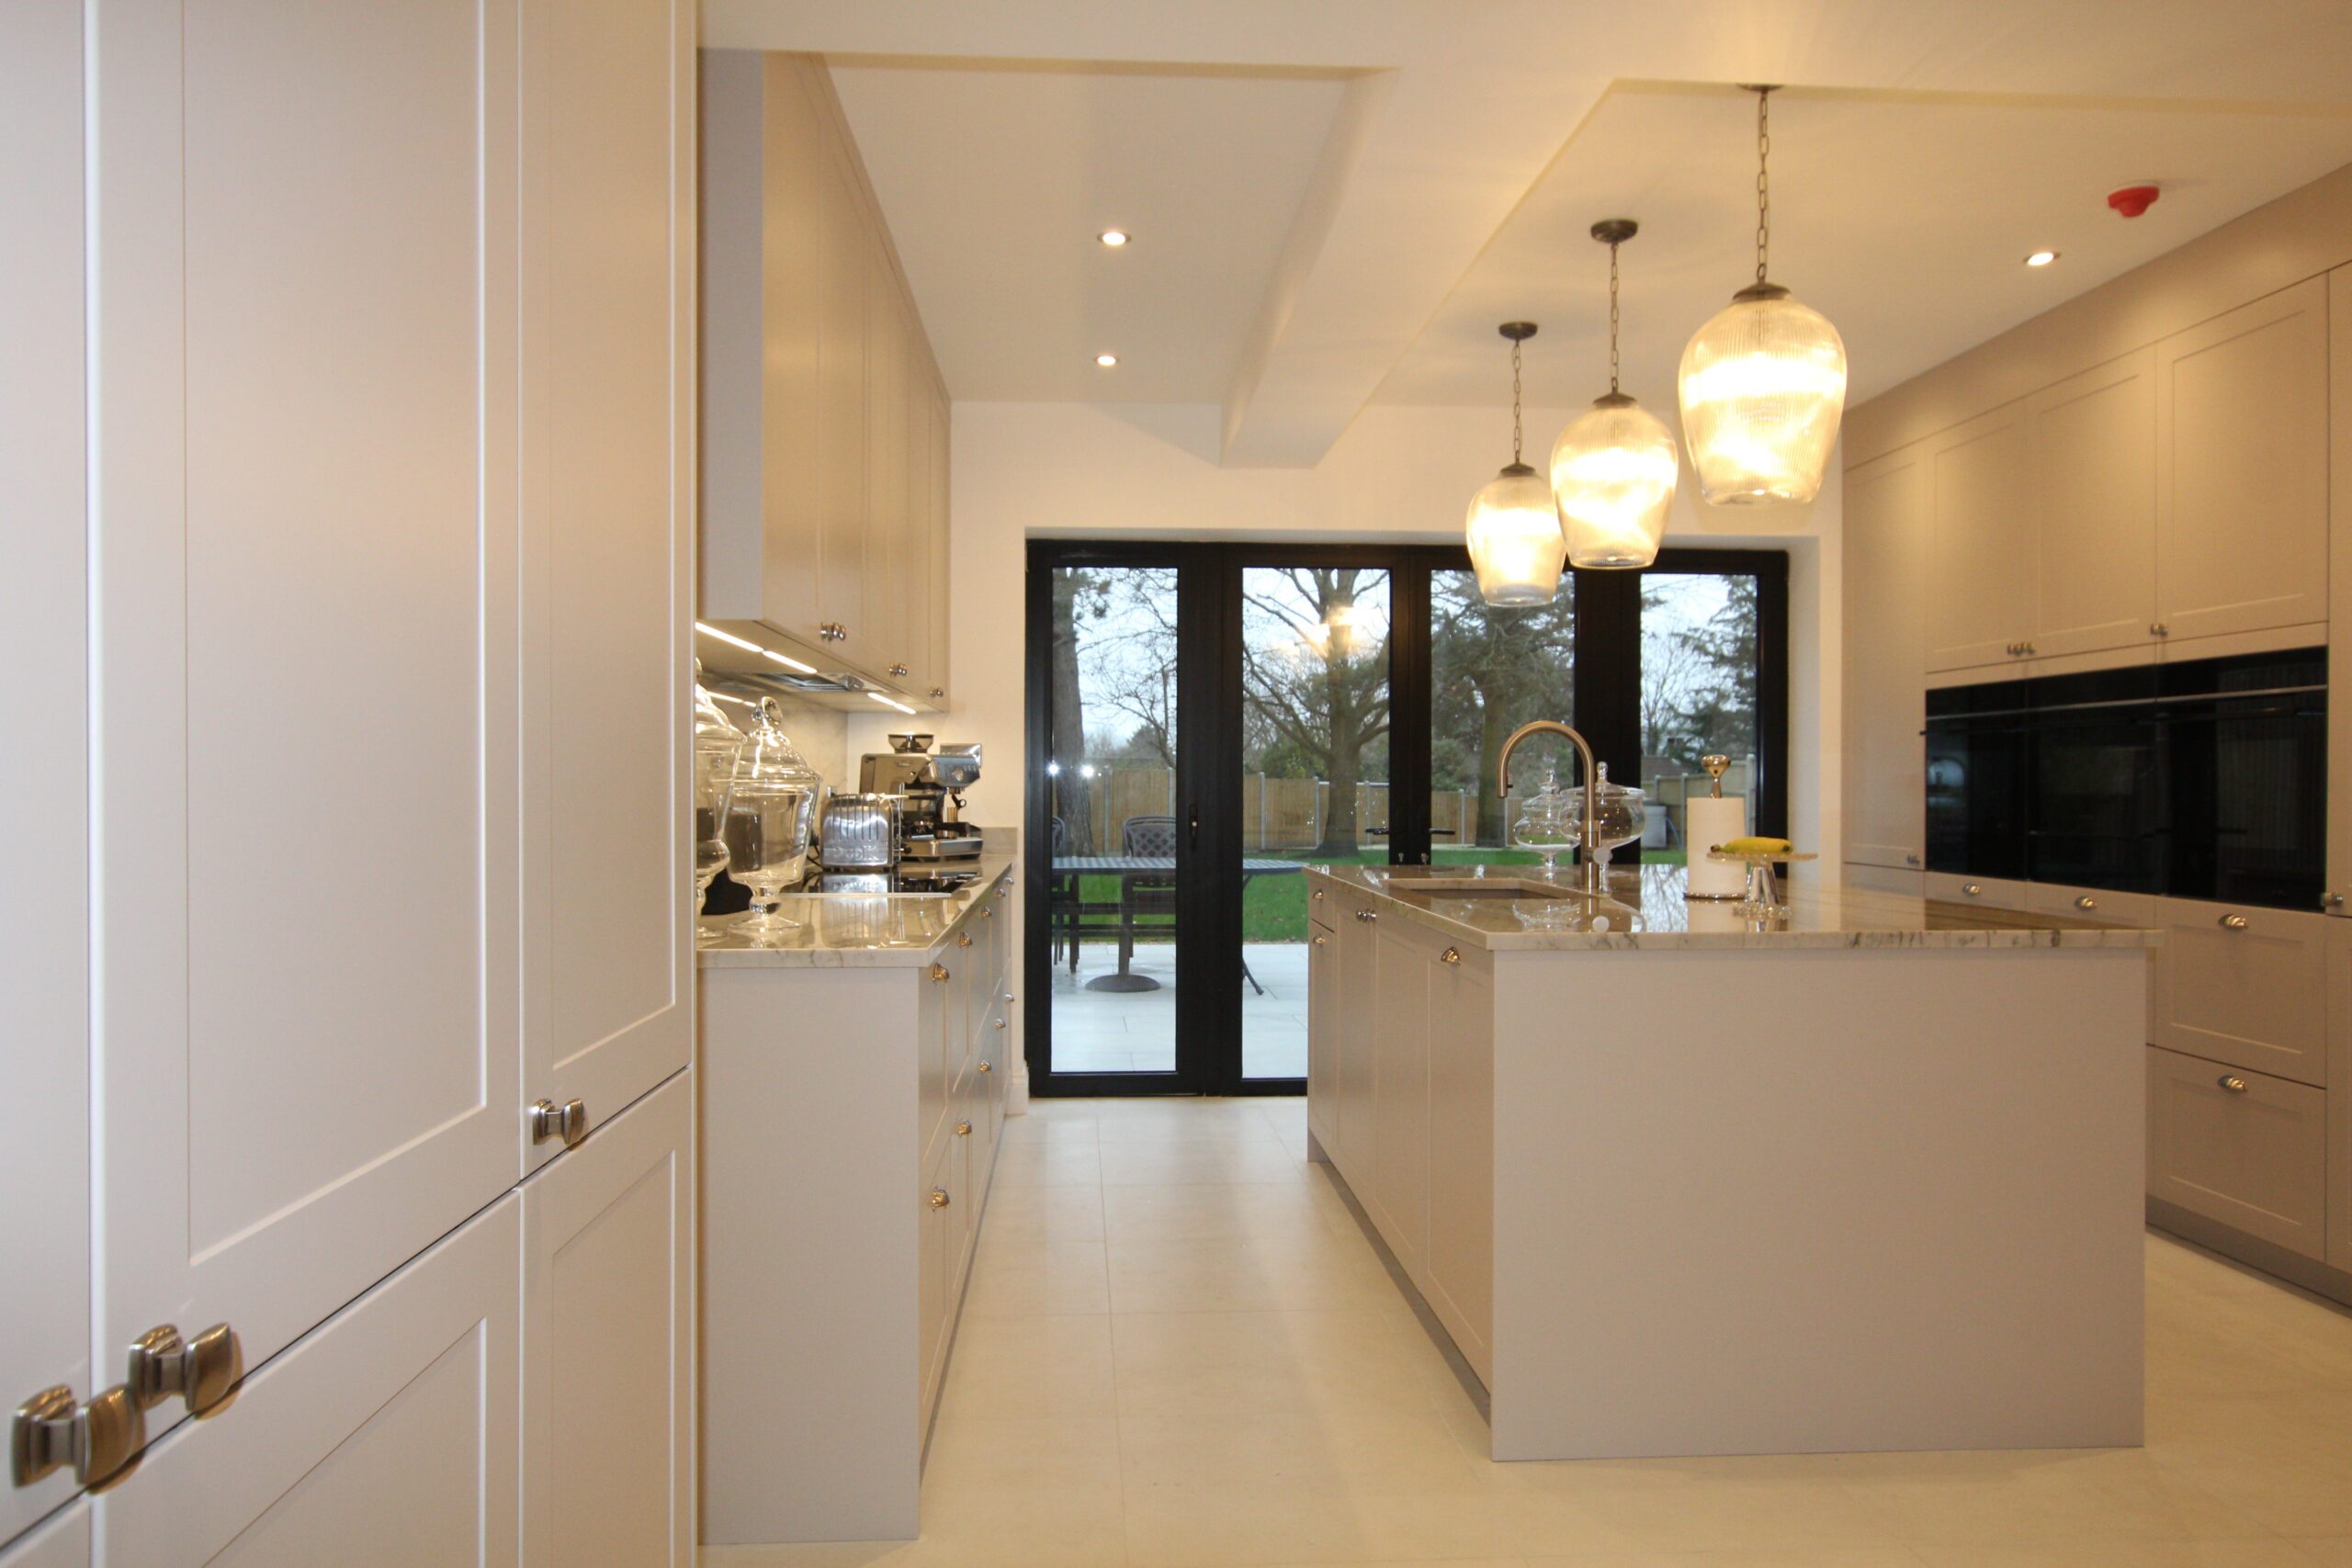 German Kitchen HACKER designed, supplied and installed by Hampdens KB in London